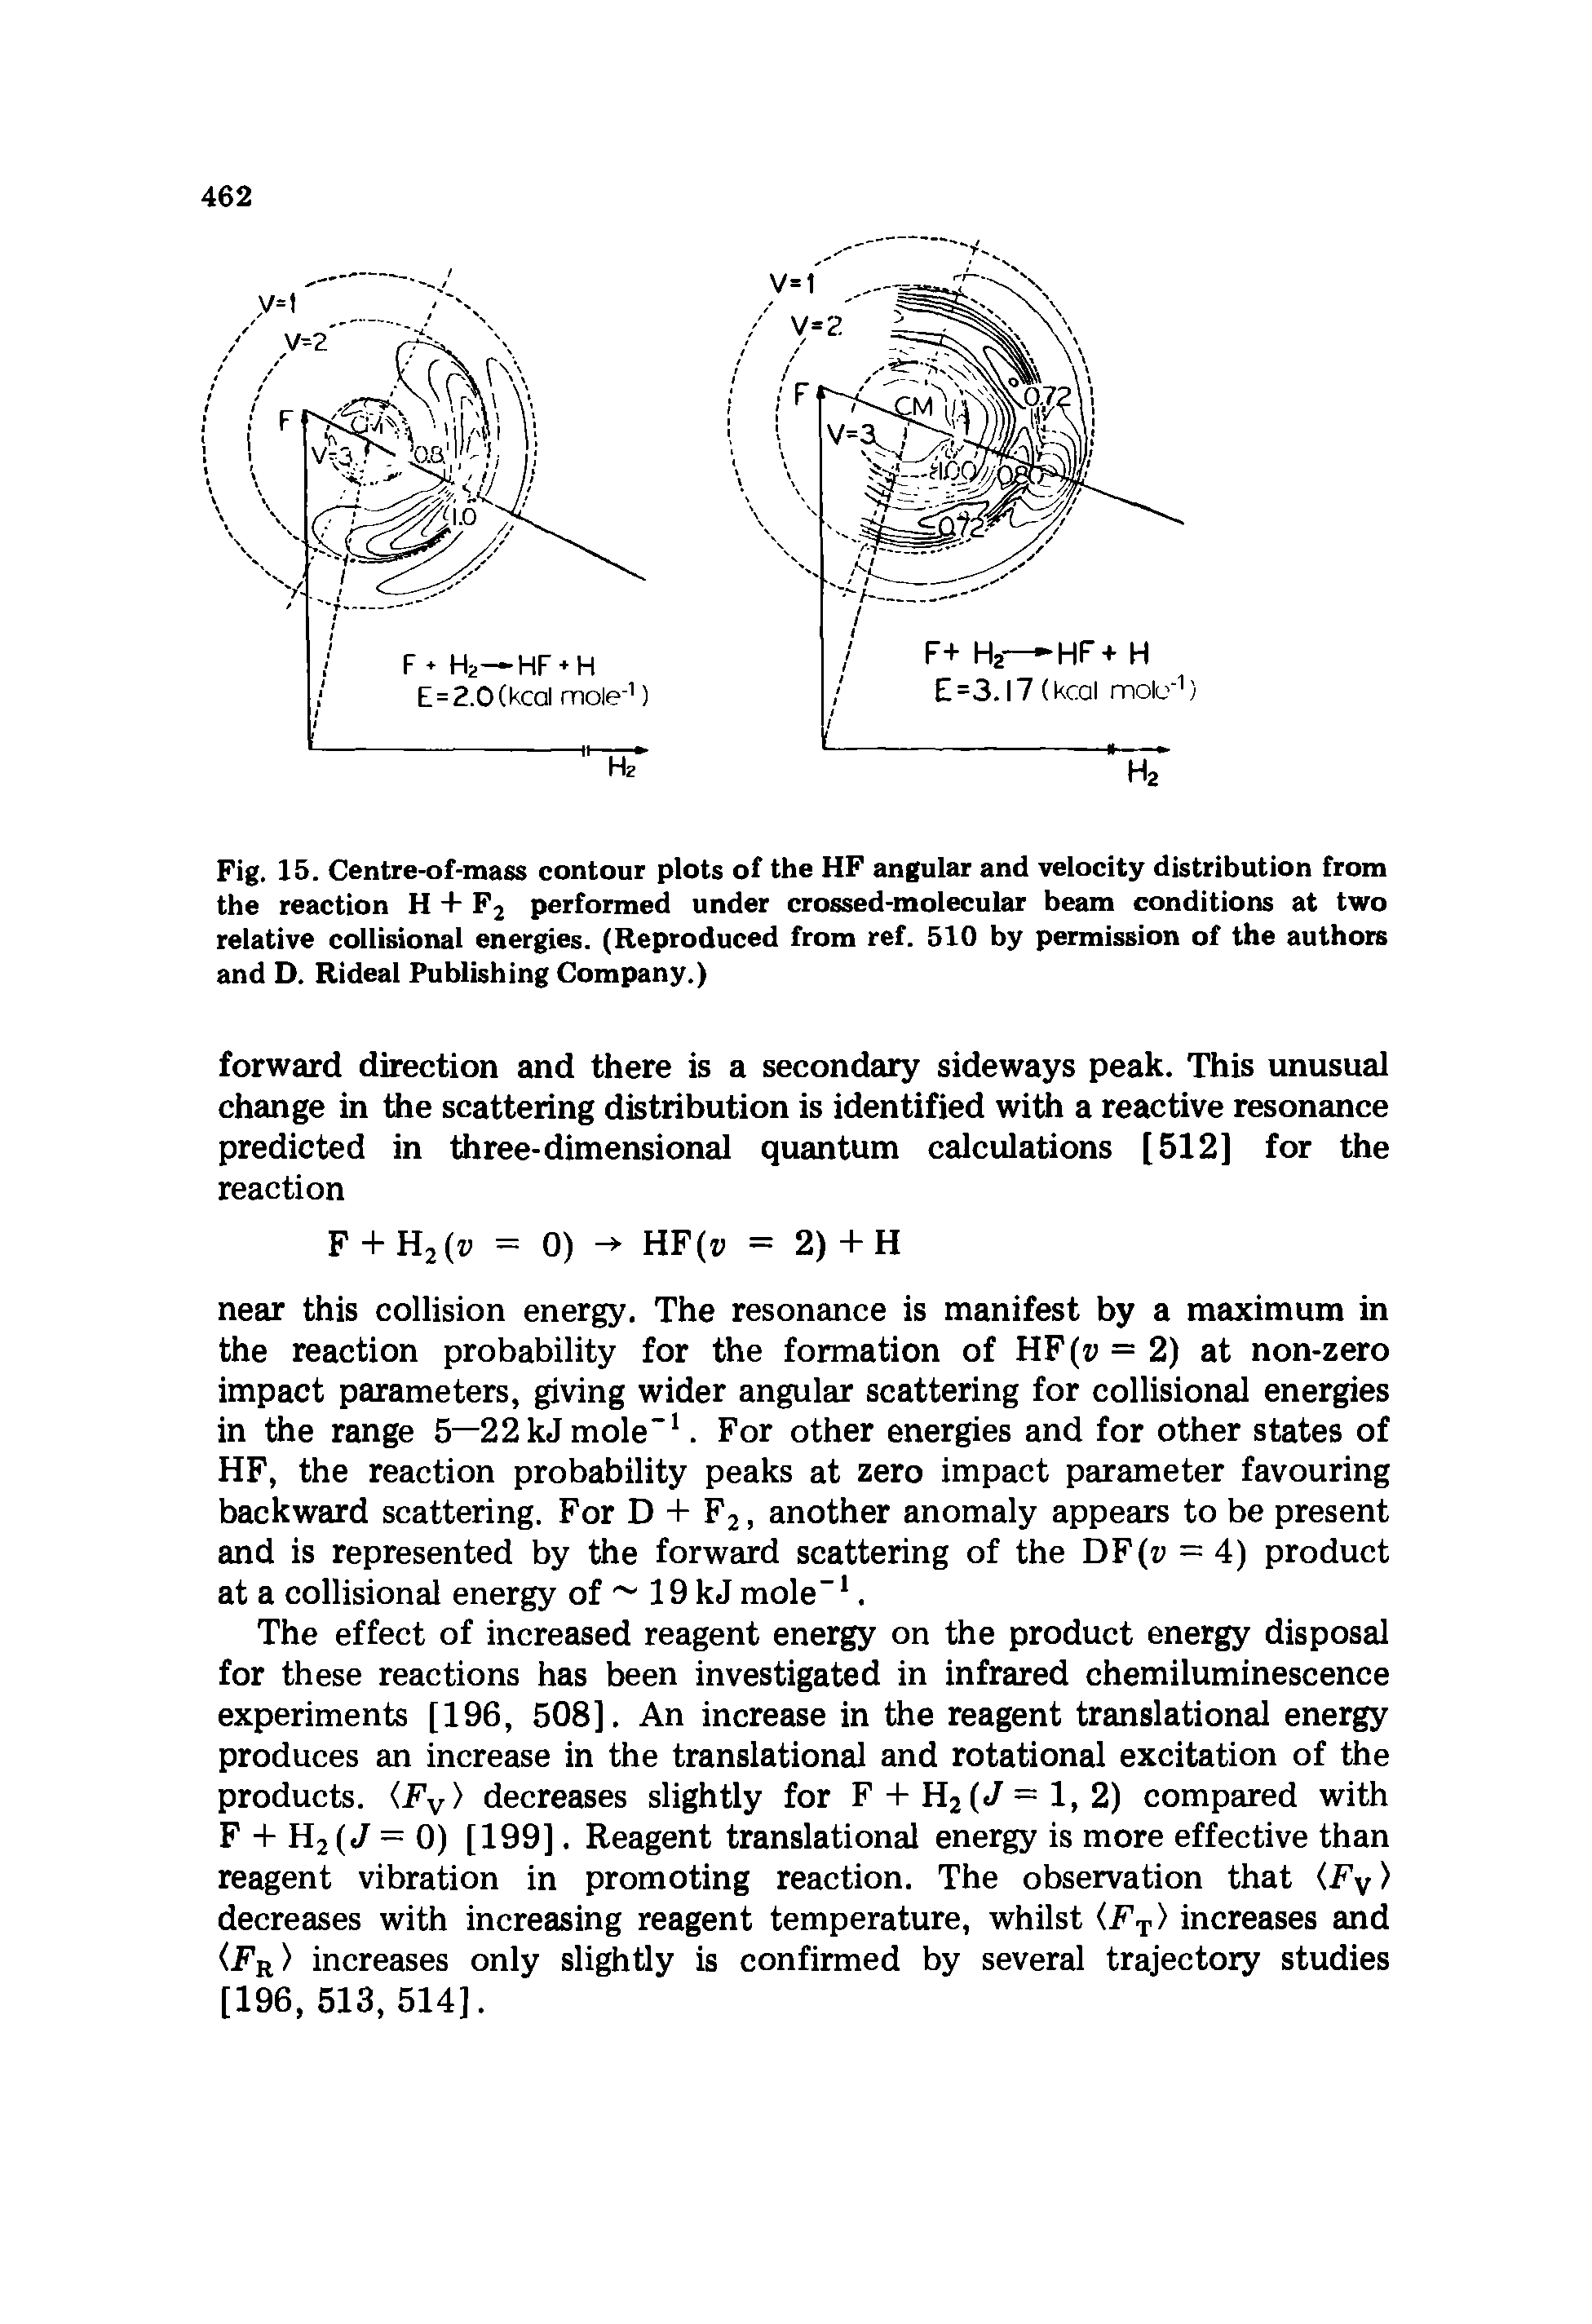 Fig. 15. Centre-of-mass contour plots of the HF angular and velocity distribution from the reaction H + F2 performed under crossed-molecular beam conditions at two relative collisional energies. (Reproduced from ref. 510 by permission of the authors and D. Rideal Publishing Company.)...